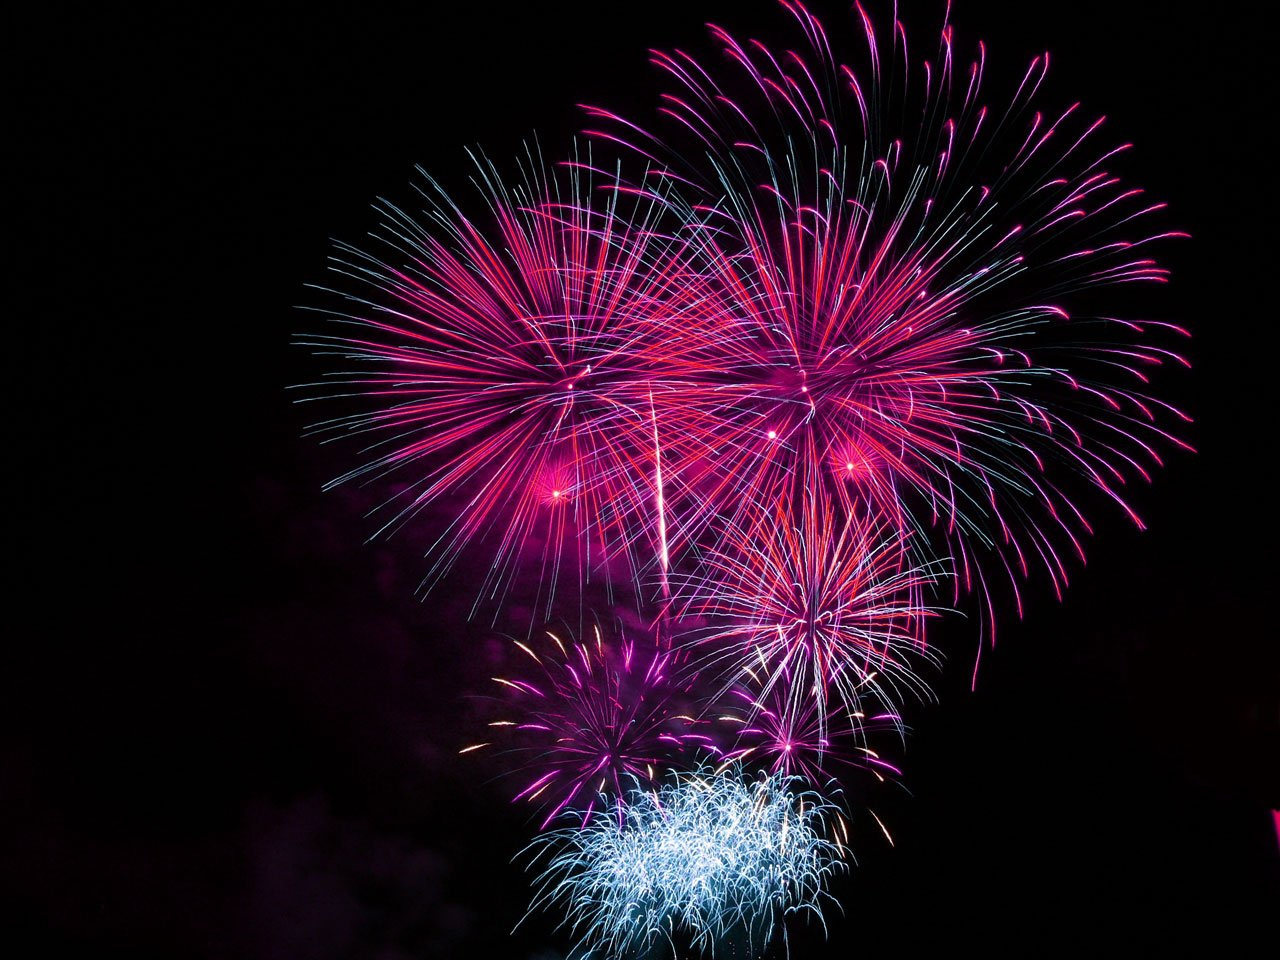 Pink and Blue Fireworks Display during Night Time